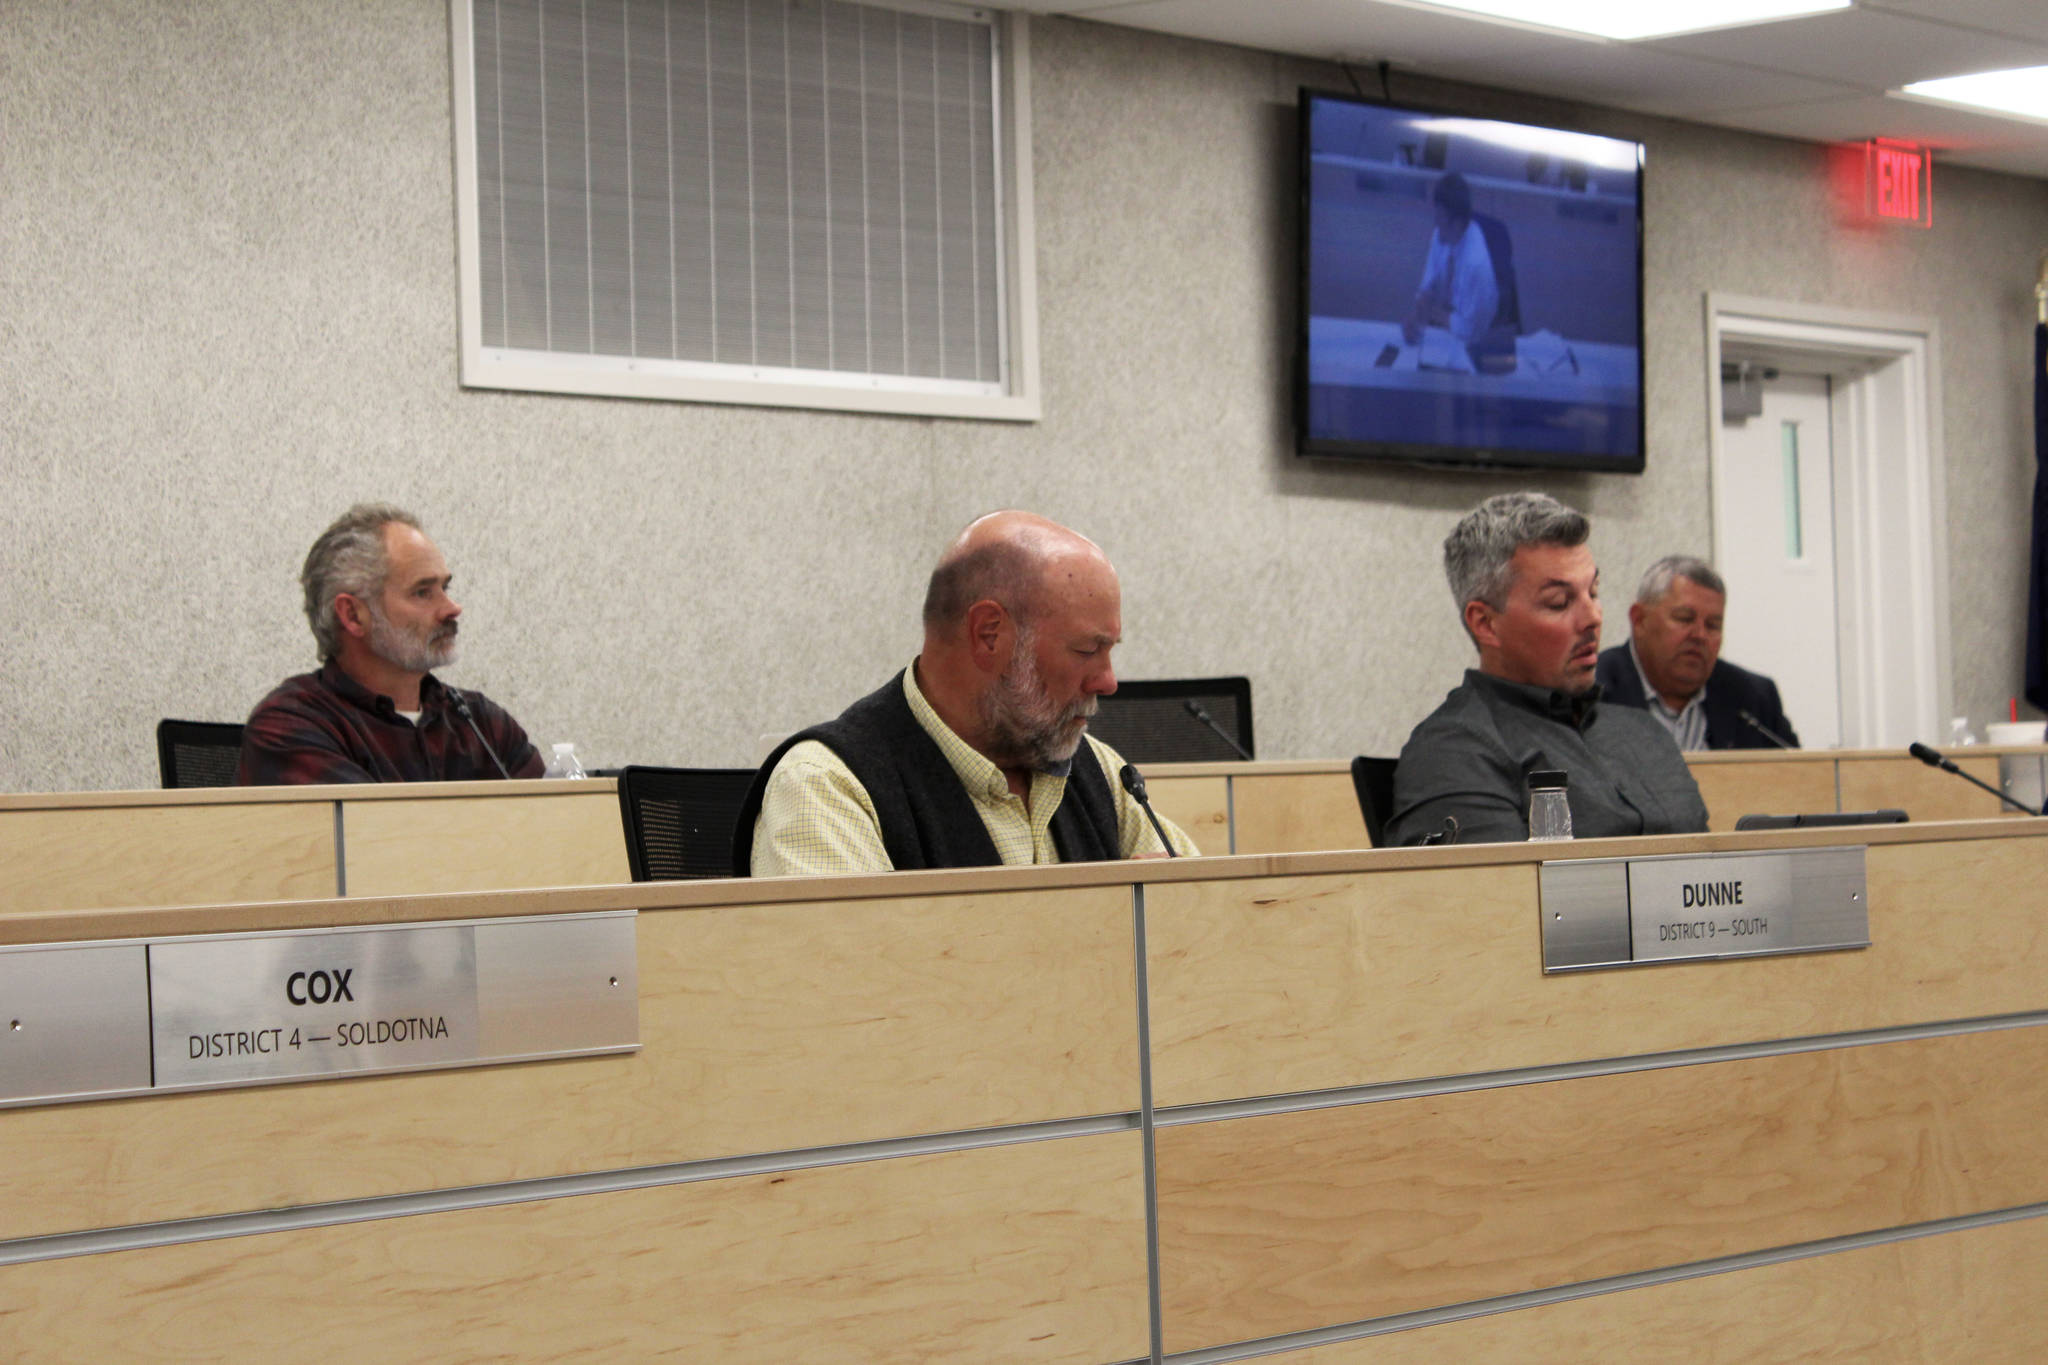 Assembly Member Willy Dunne (second from left) speaks during a meeting of the Kenai Peninsula Borough Assembly on Tuesday, July 6, 2021 in Soldotna, Alaska. (Ashlyn O'Hara/Peninsula Clarion)